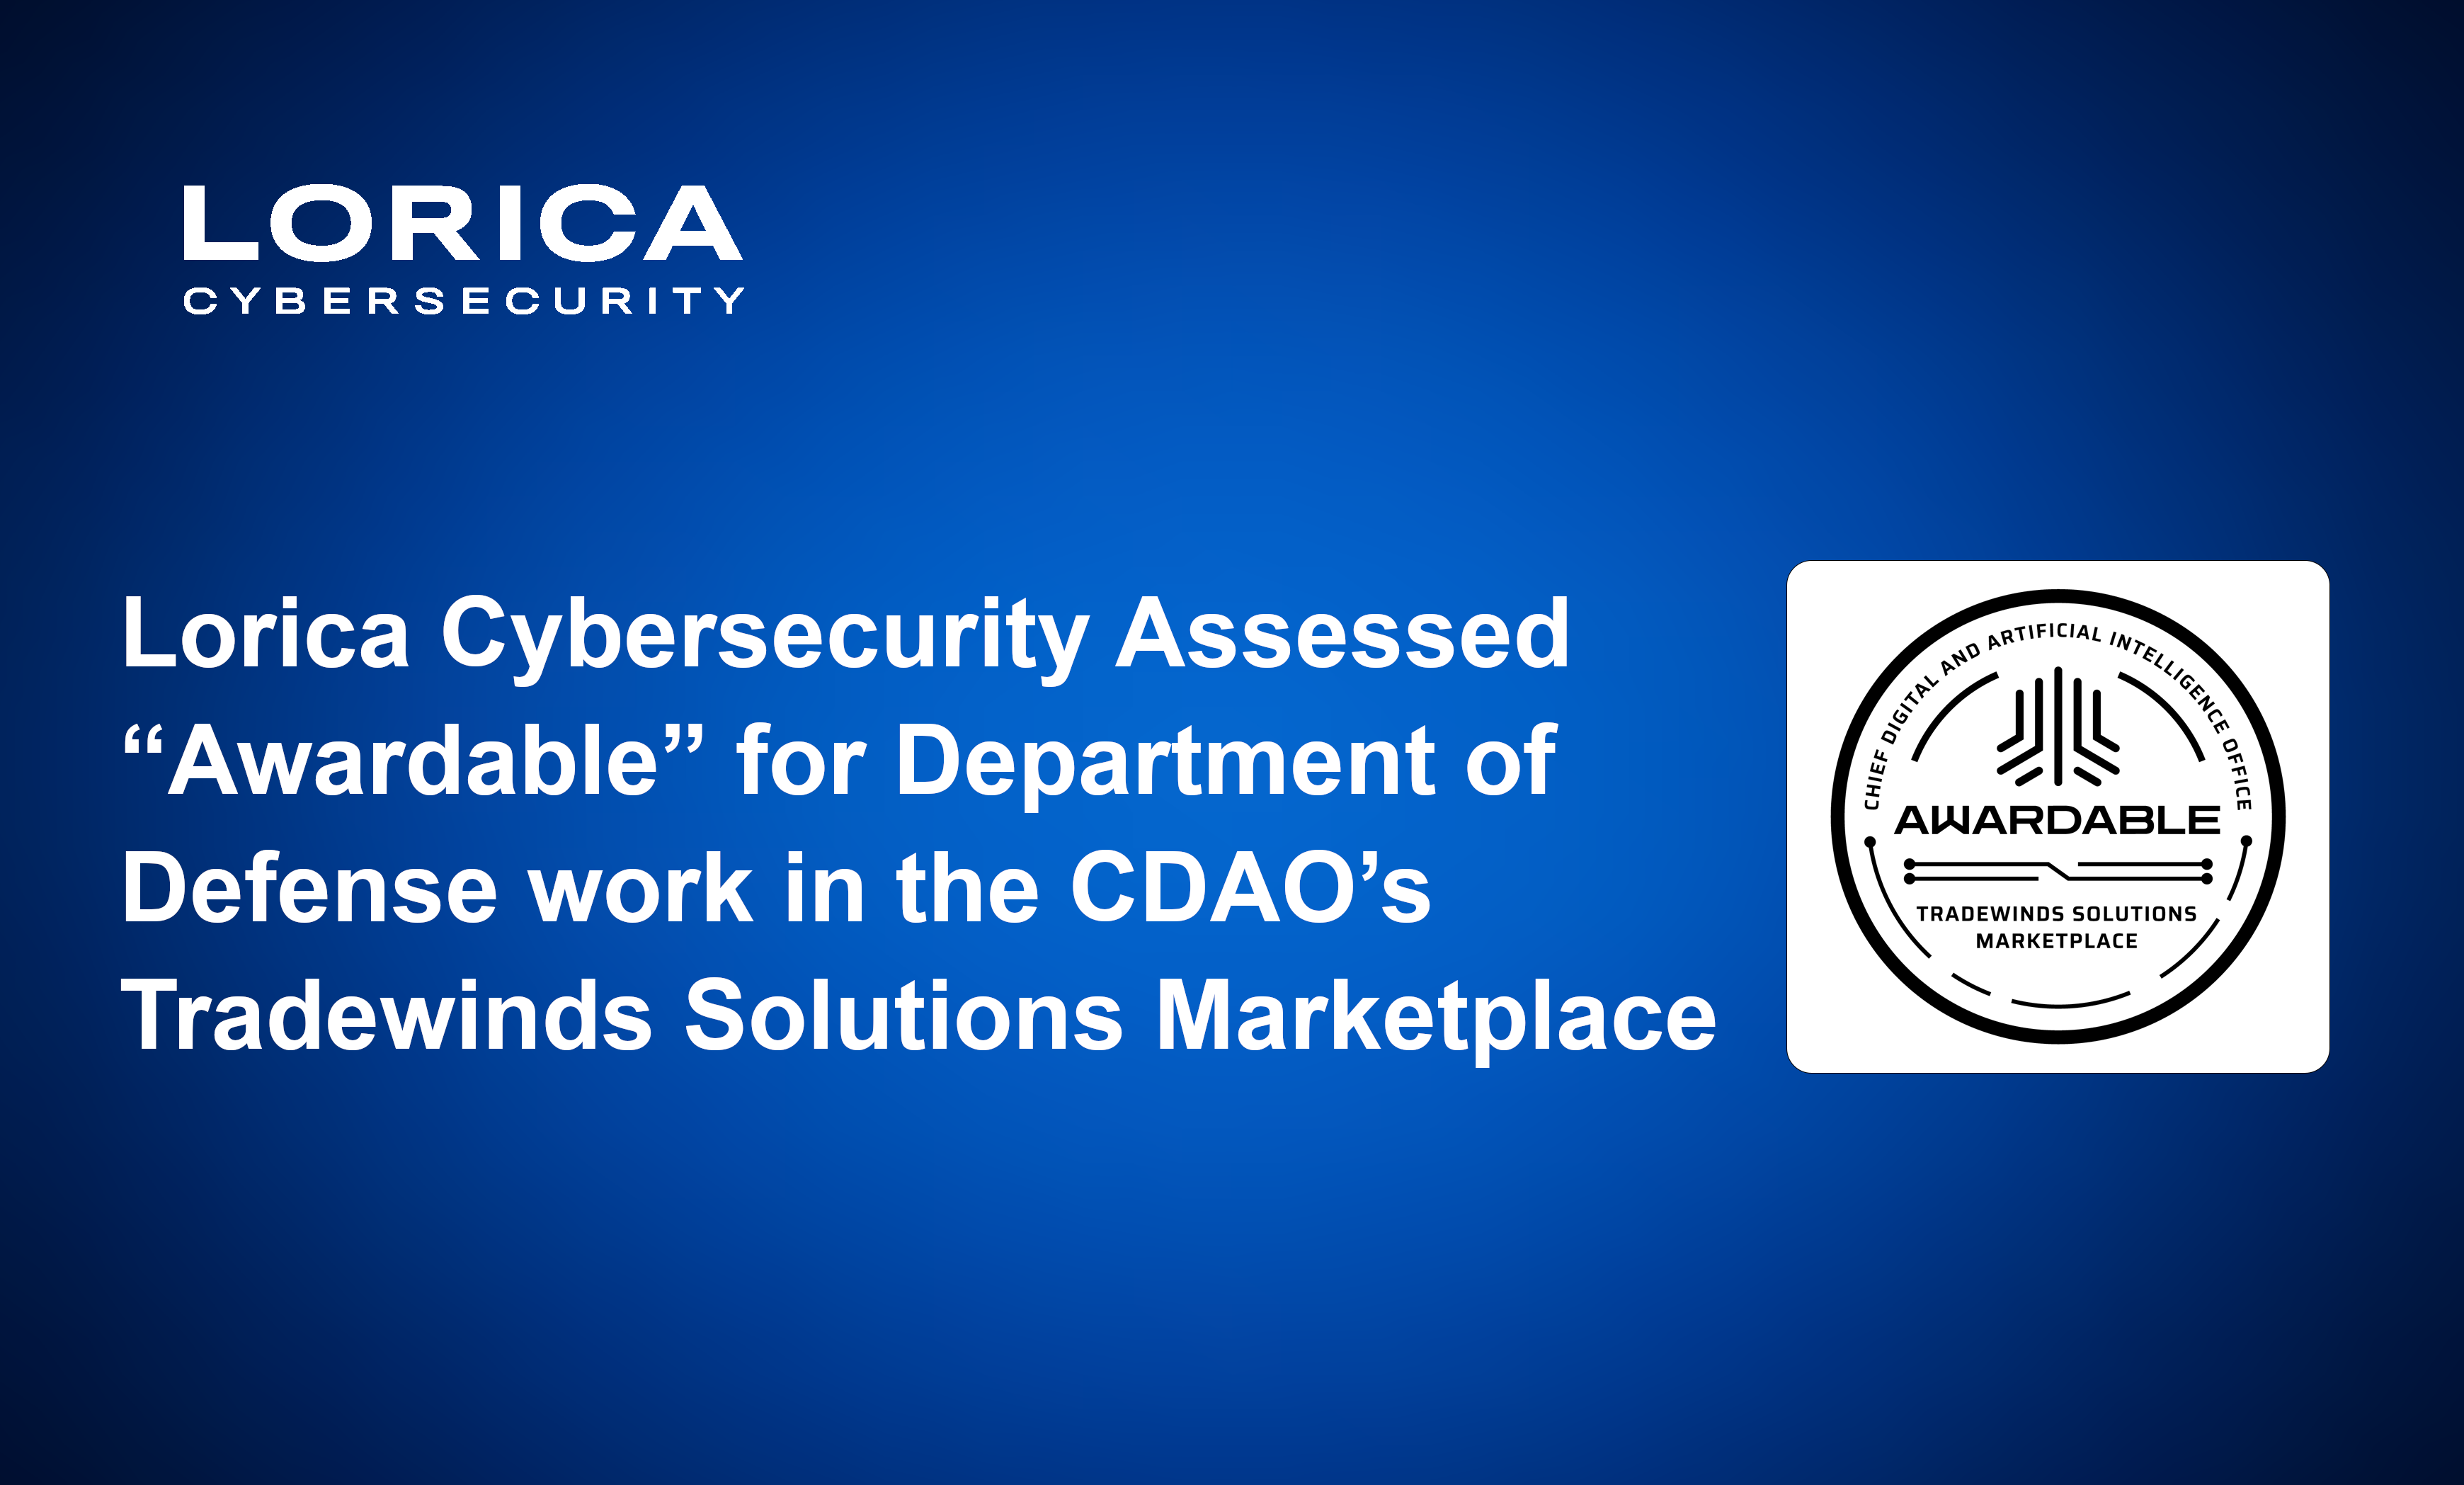 Lorica Cybersecurity Assessed “Awardable” for Department of Defense work in the CDAO’s Tradewinds Solutions Marketplace